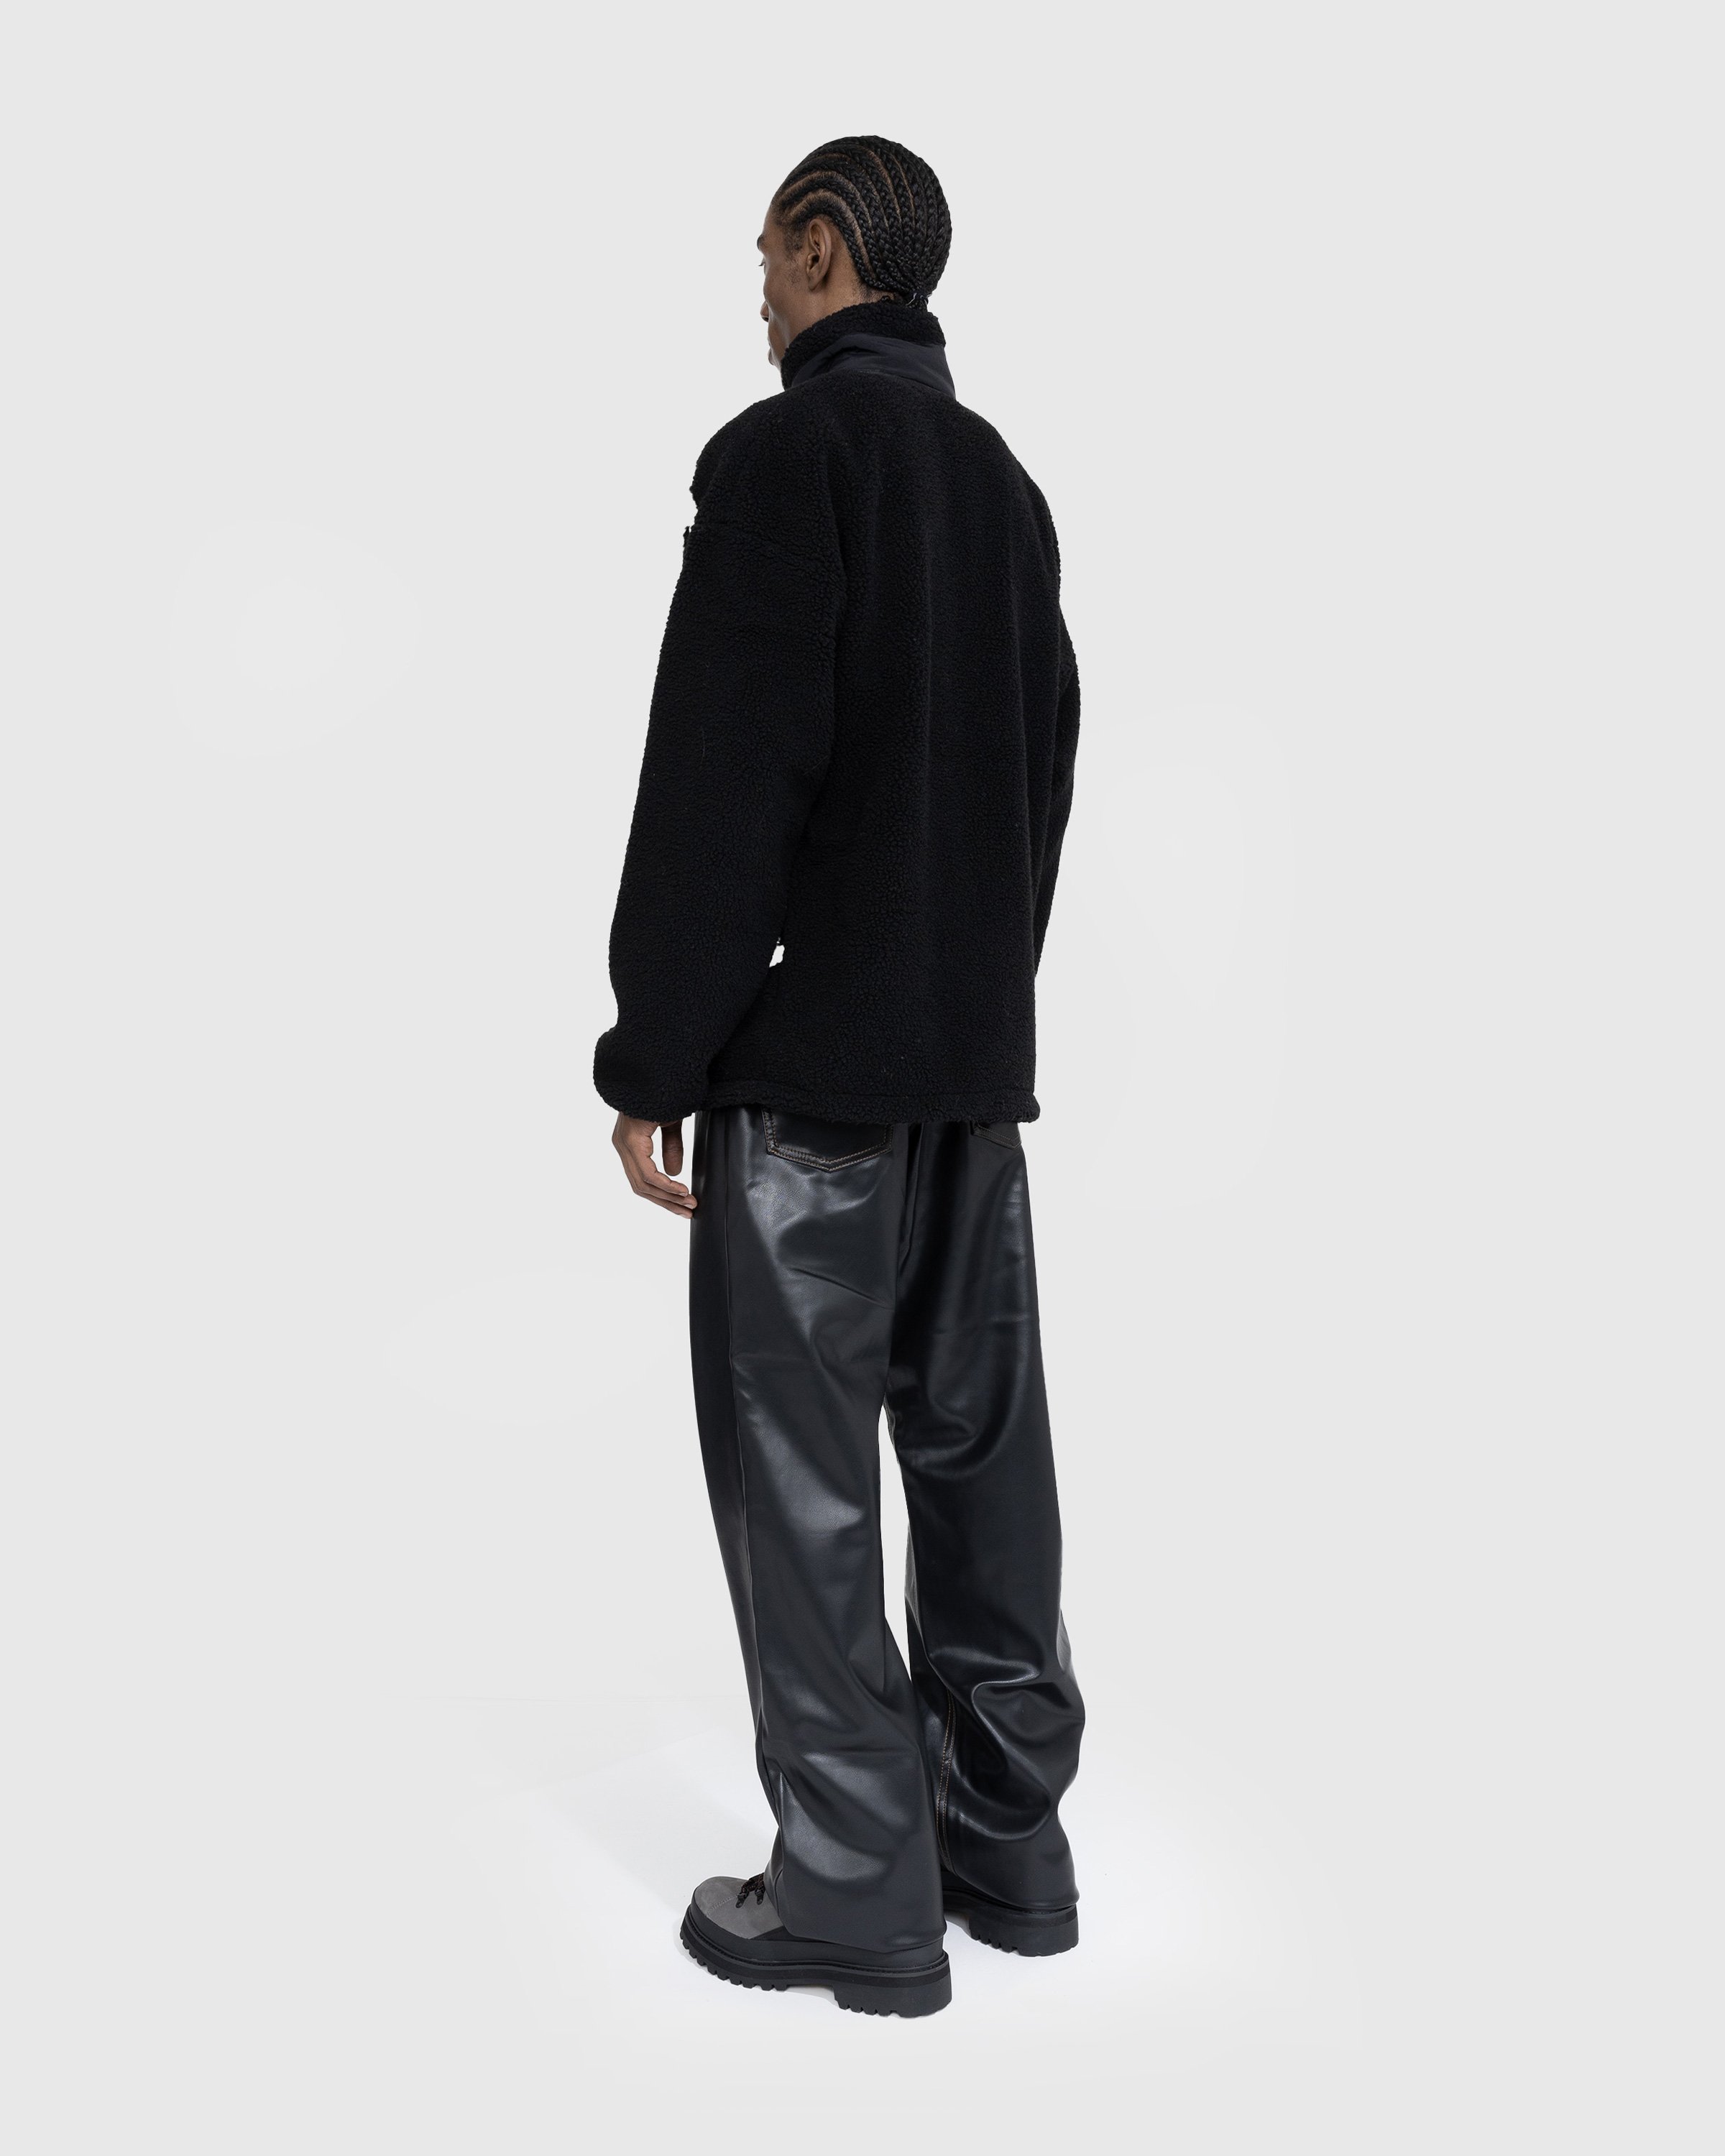 Y/Project - Y BELT LEATHER PANTS - Clothing - Black - Image 4